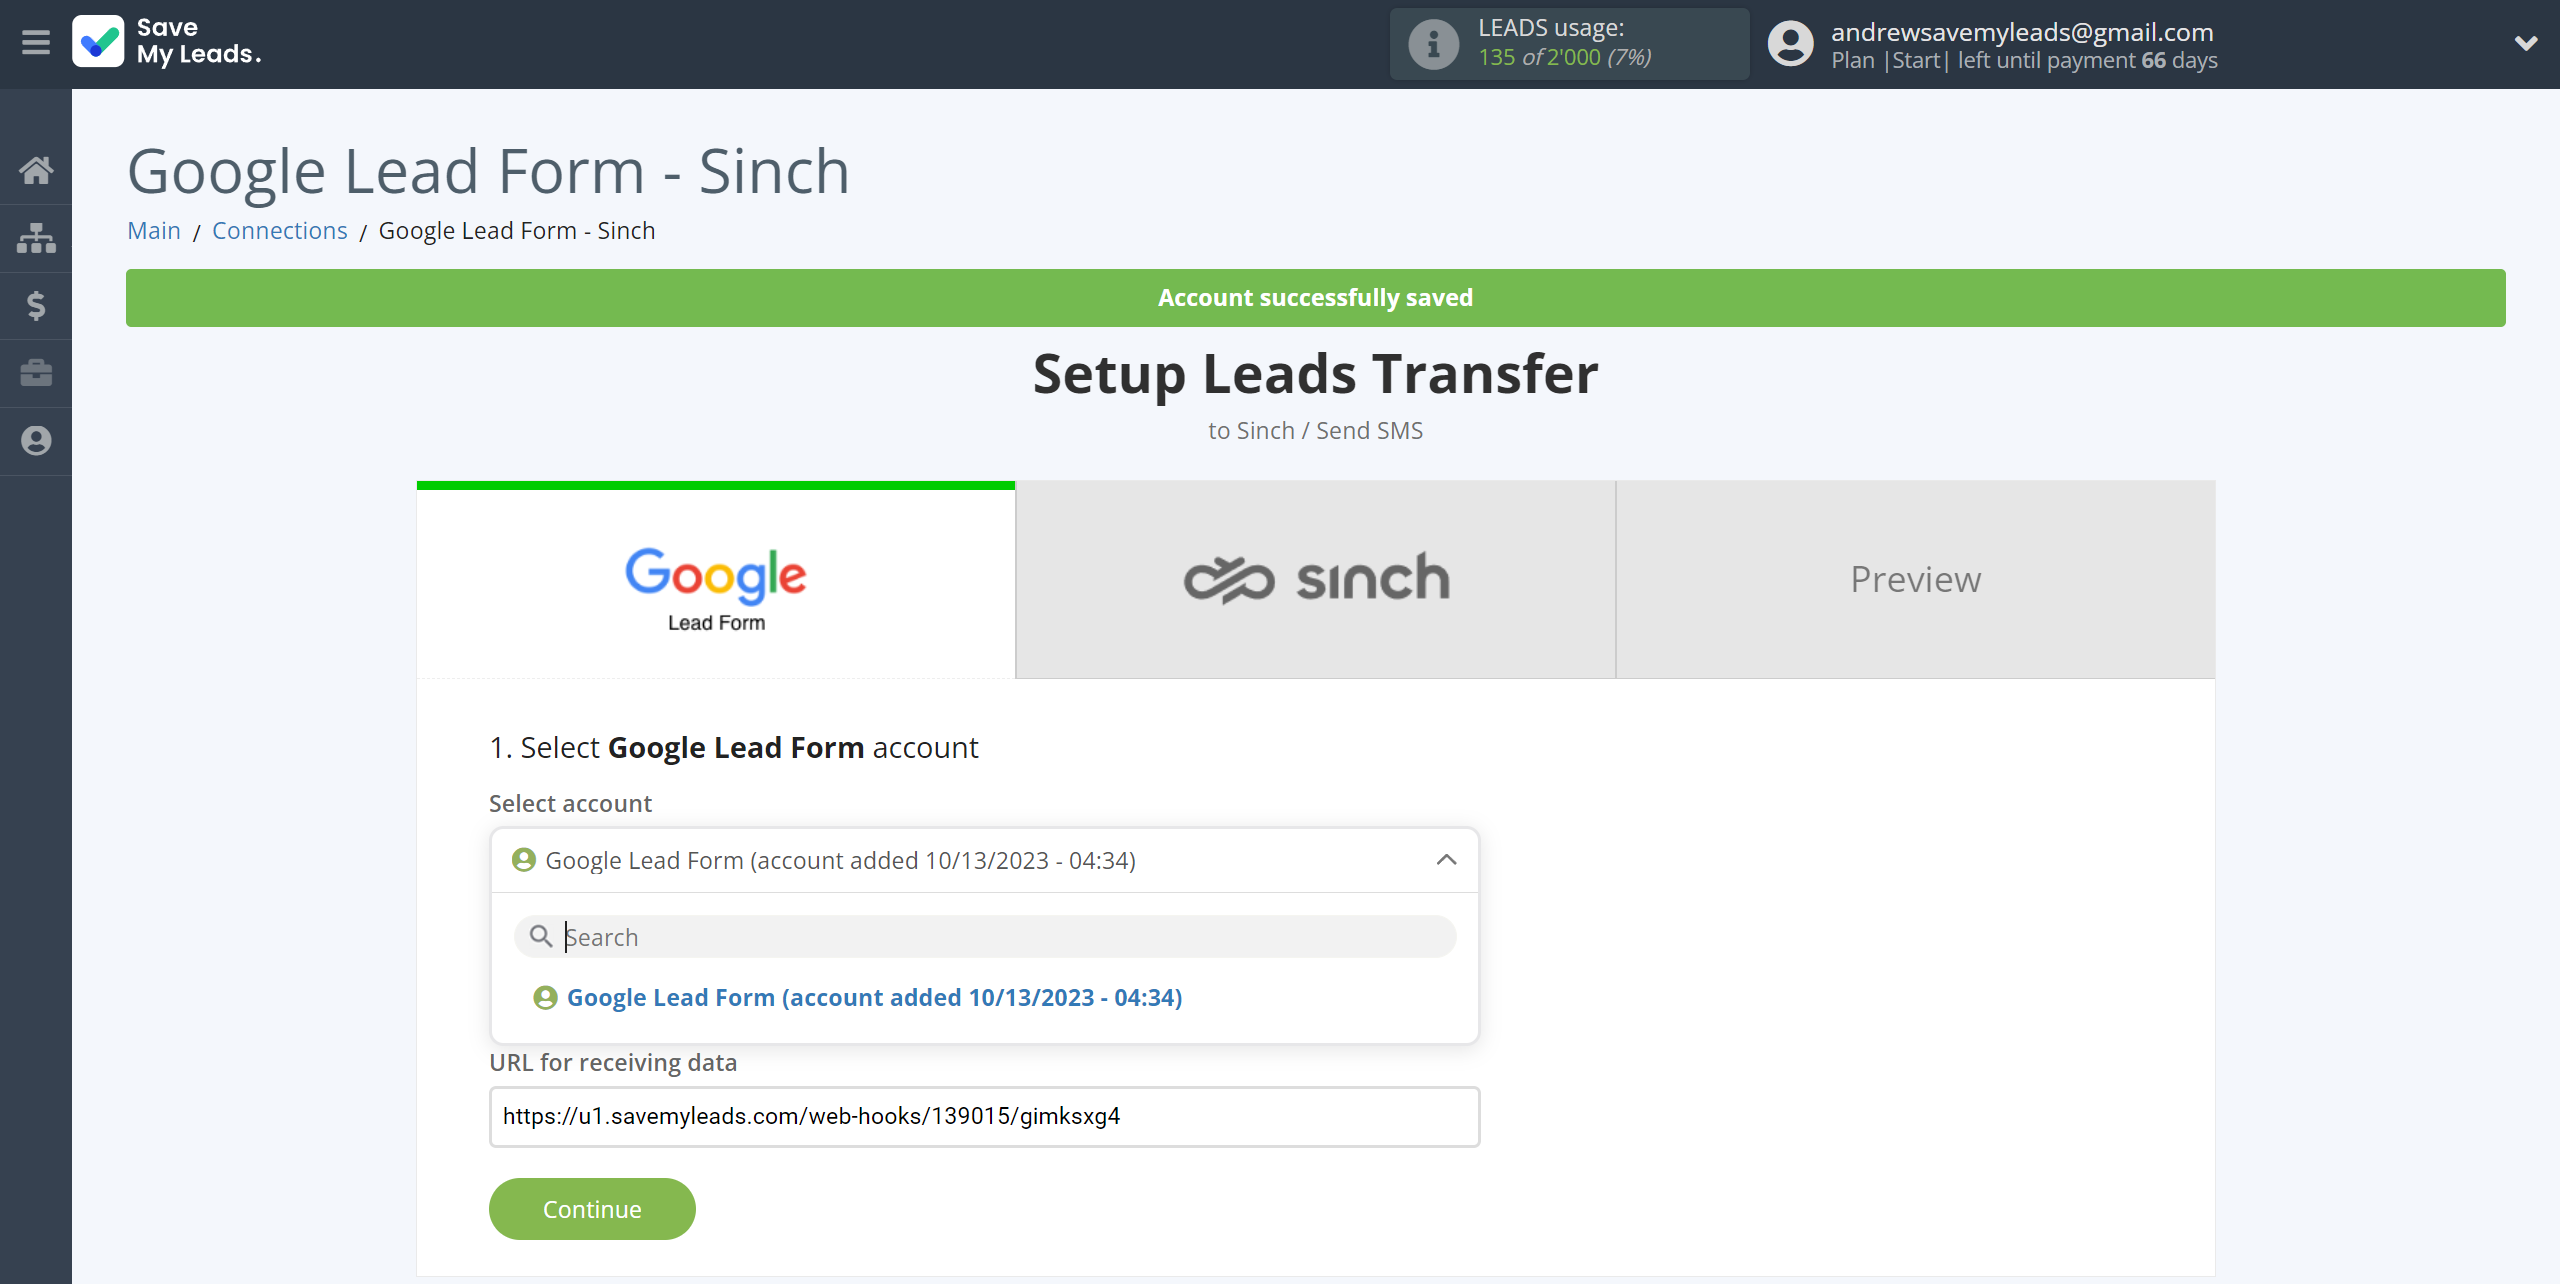 How to Connect Google Lead Form with Sinch | Data Source account selection